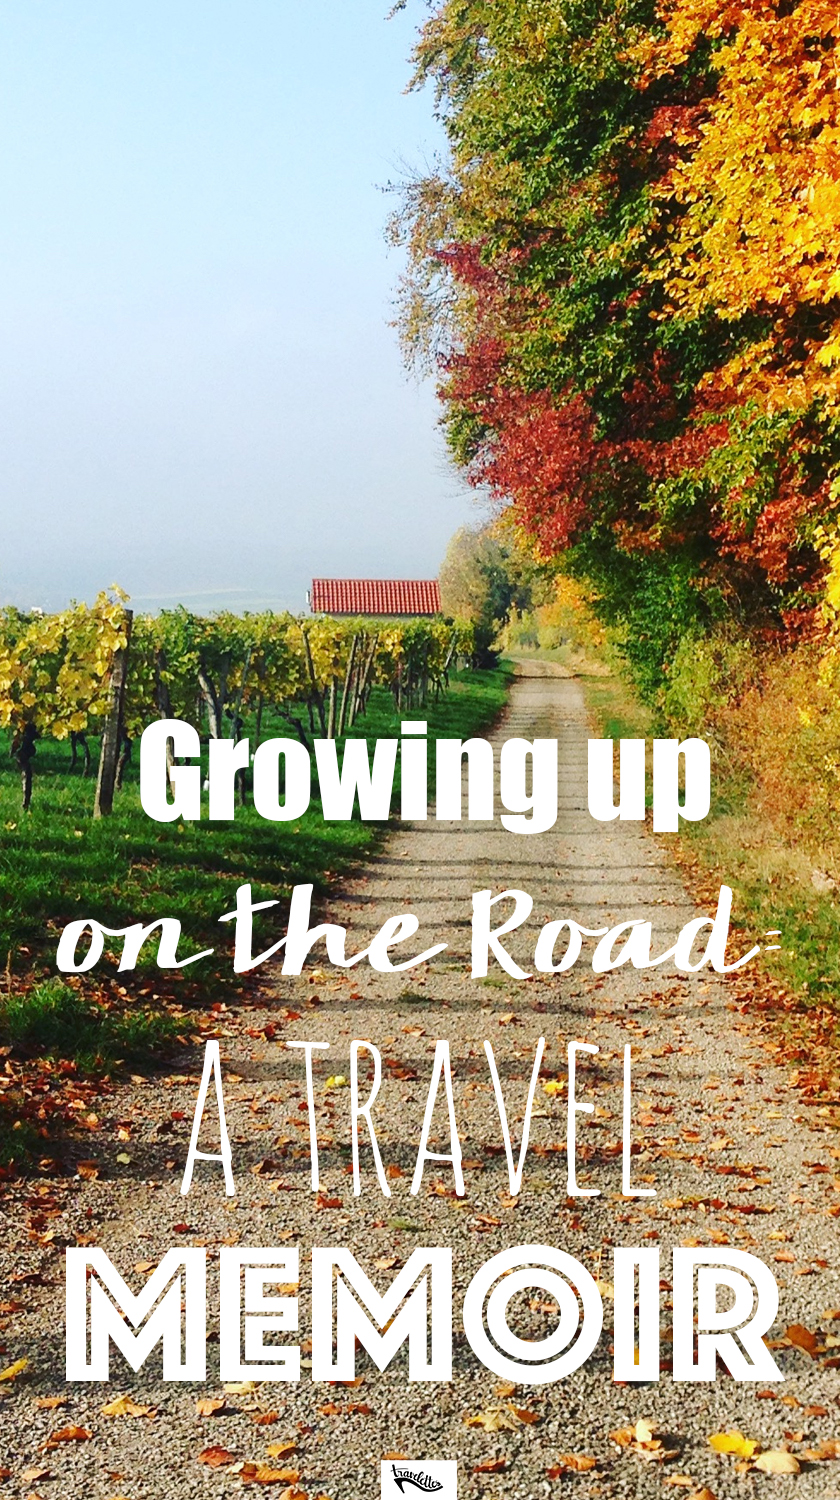 Growing up on the road: A travel memoir